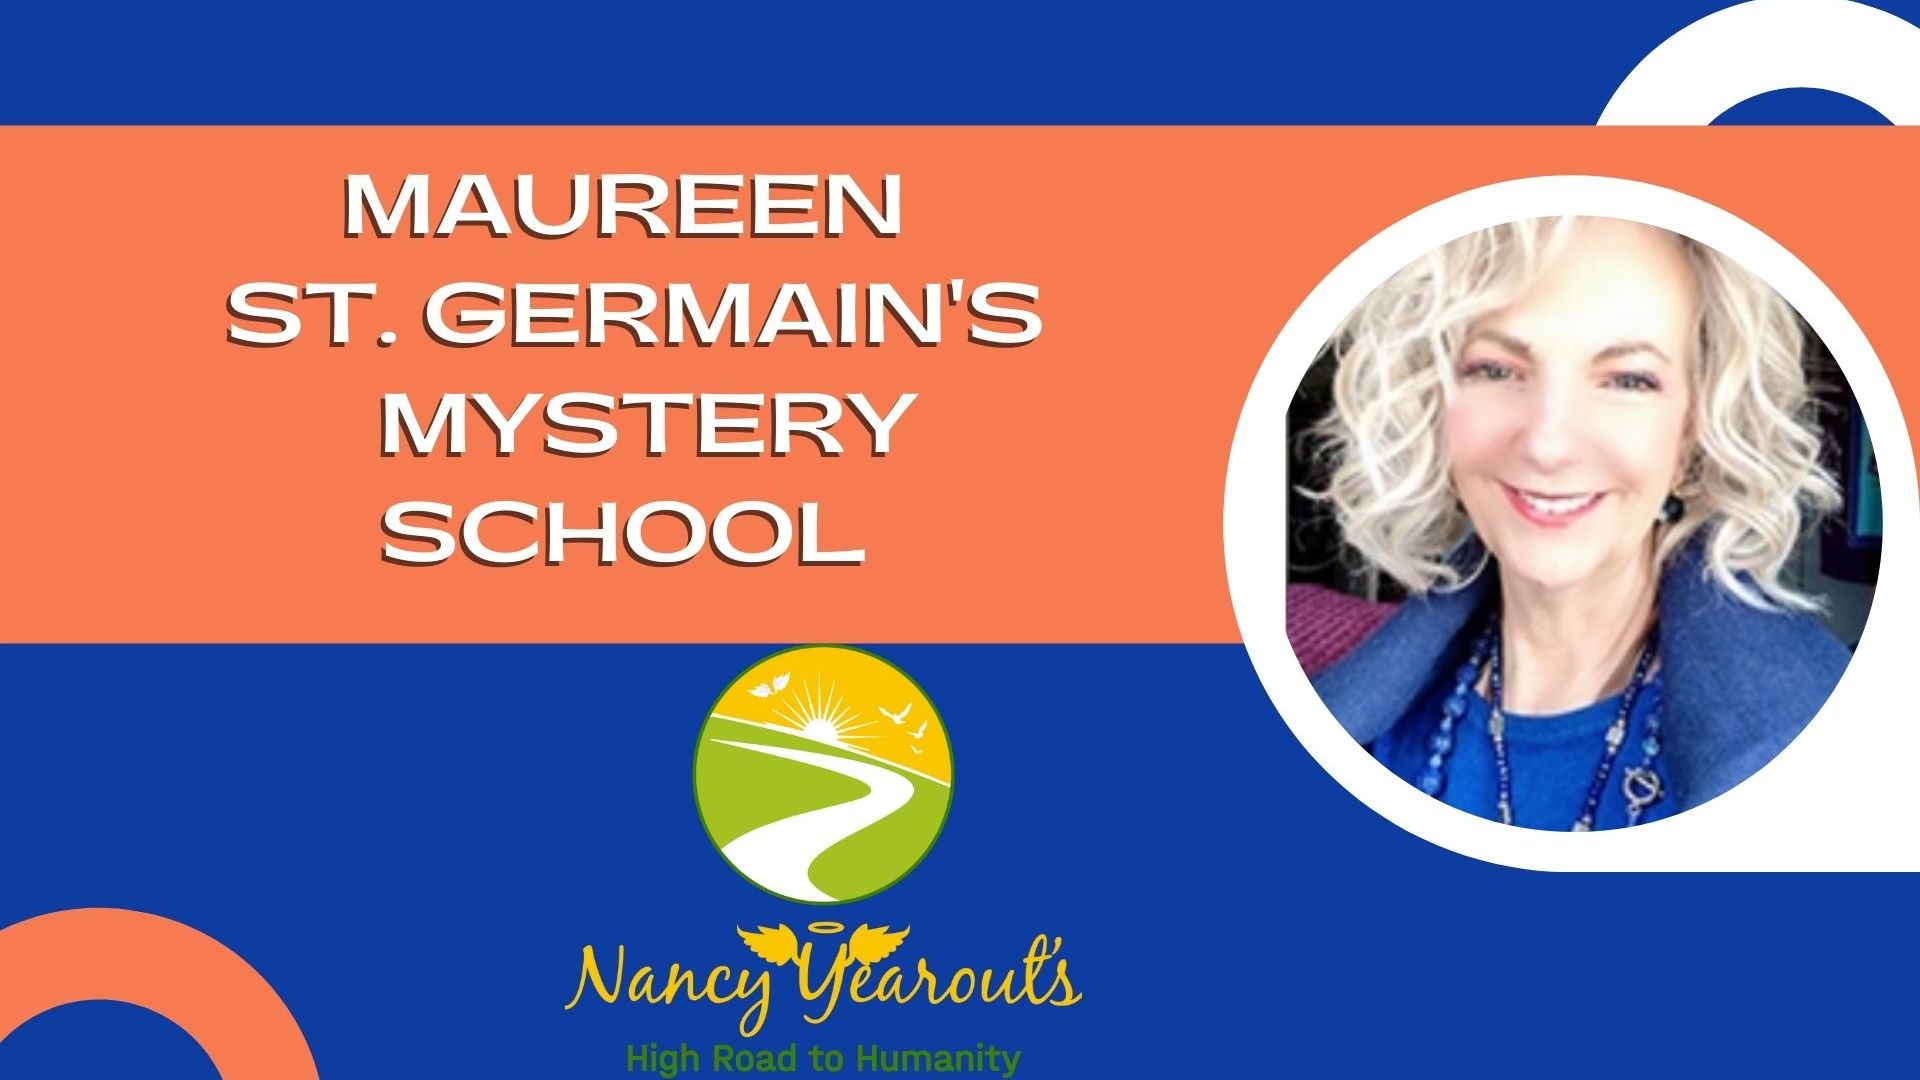 Maureen St Germain Announces her Mystery School Opening on Nancy Yearouts High Road to Humanity